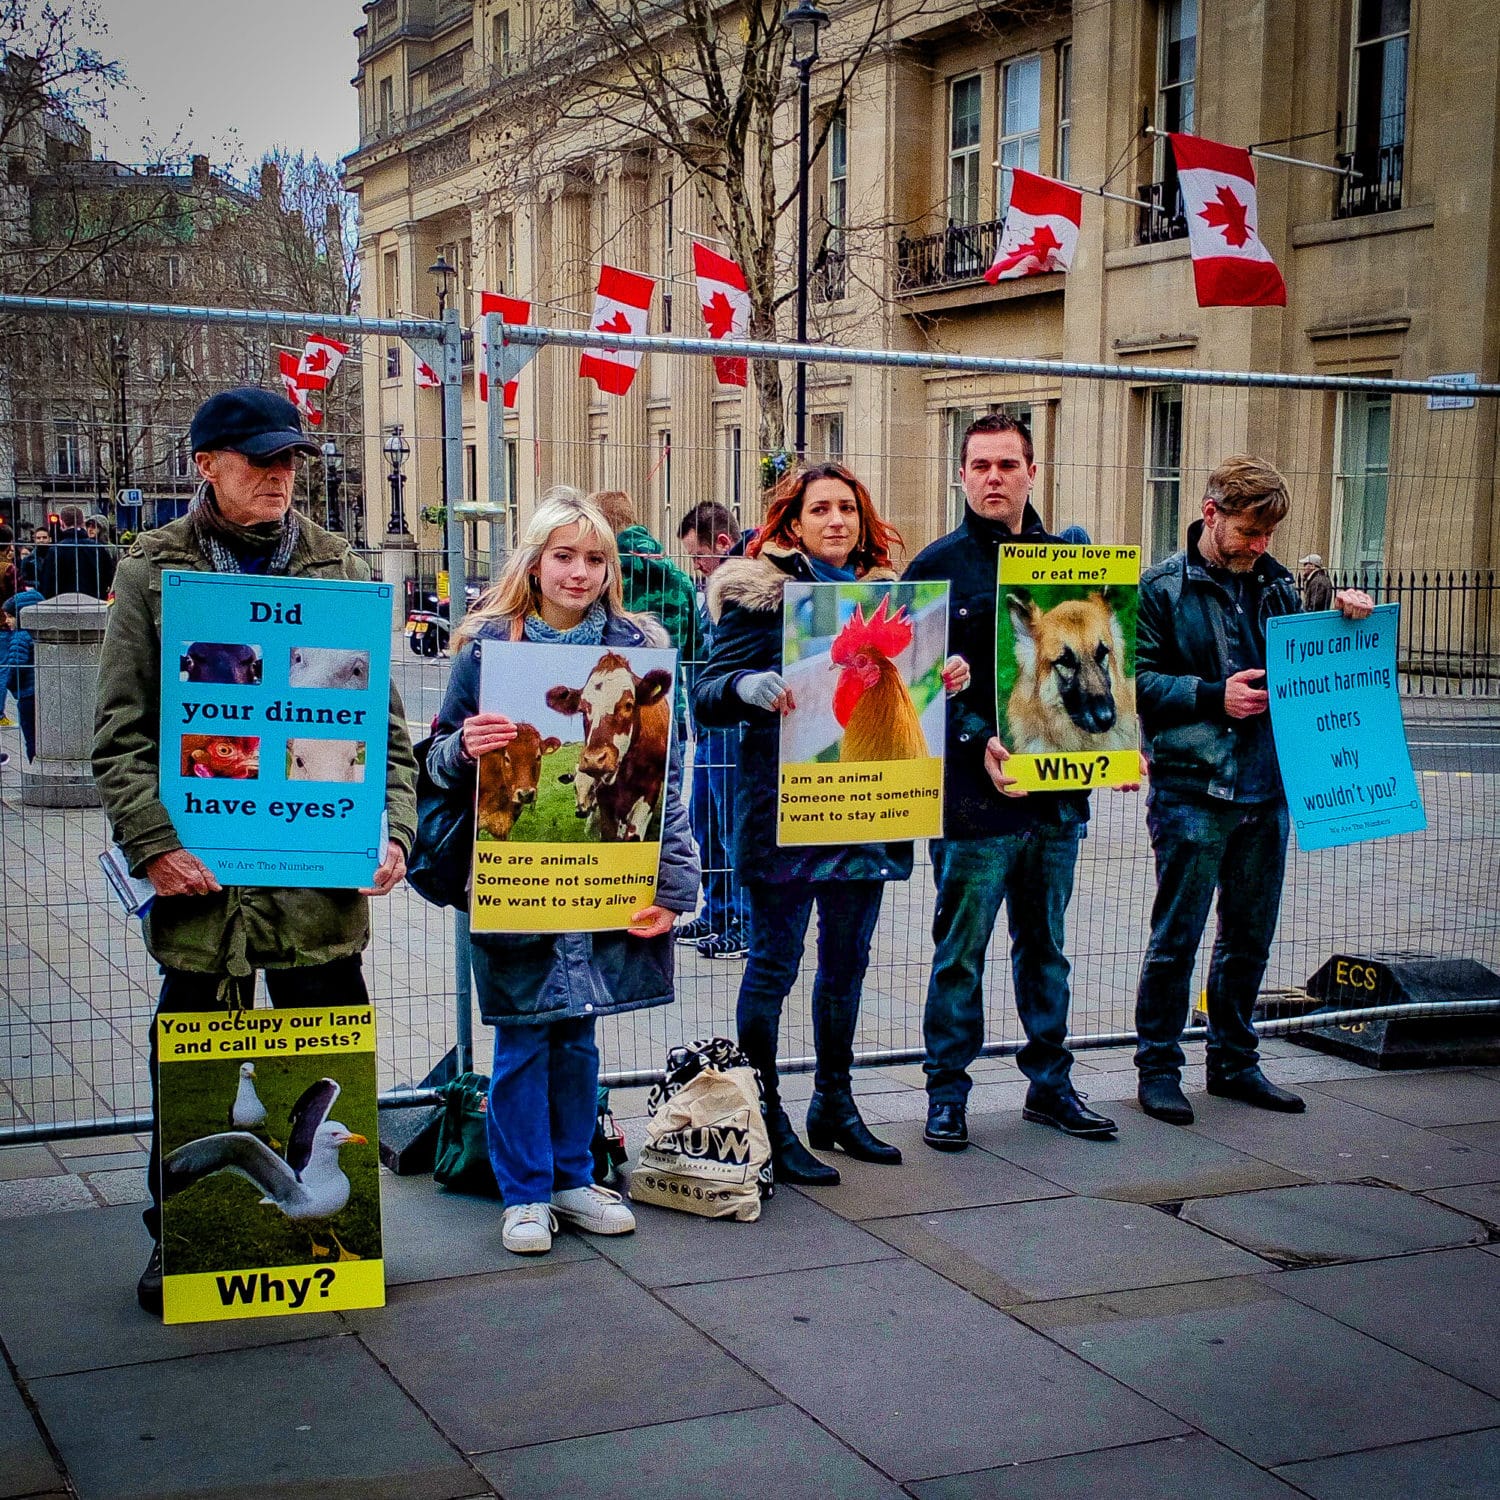 vegan activists with vegan placards demonstrating for systemic change